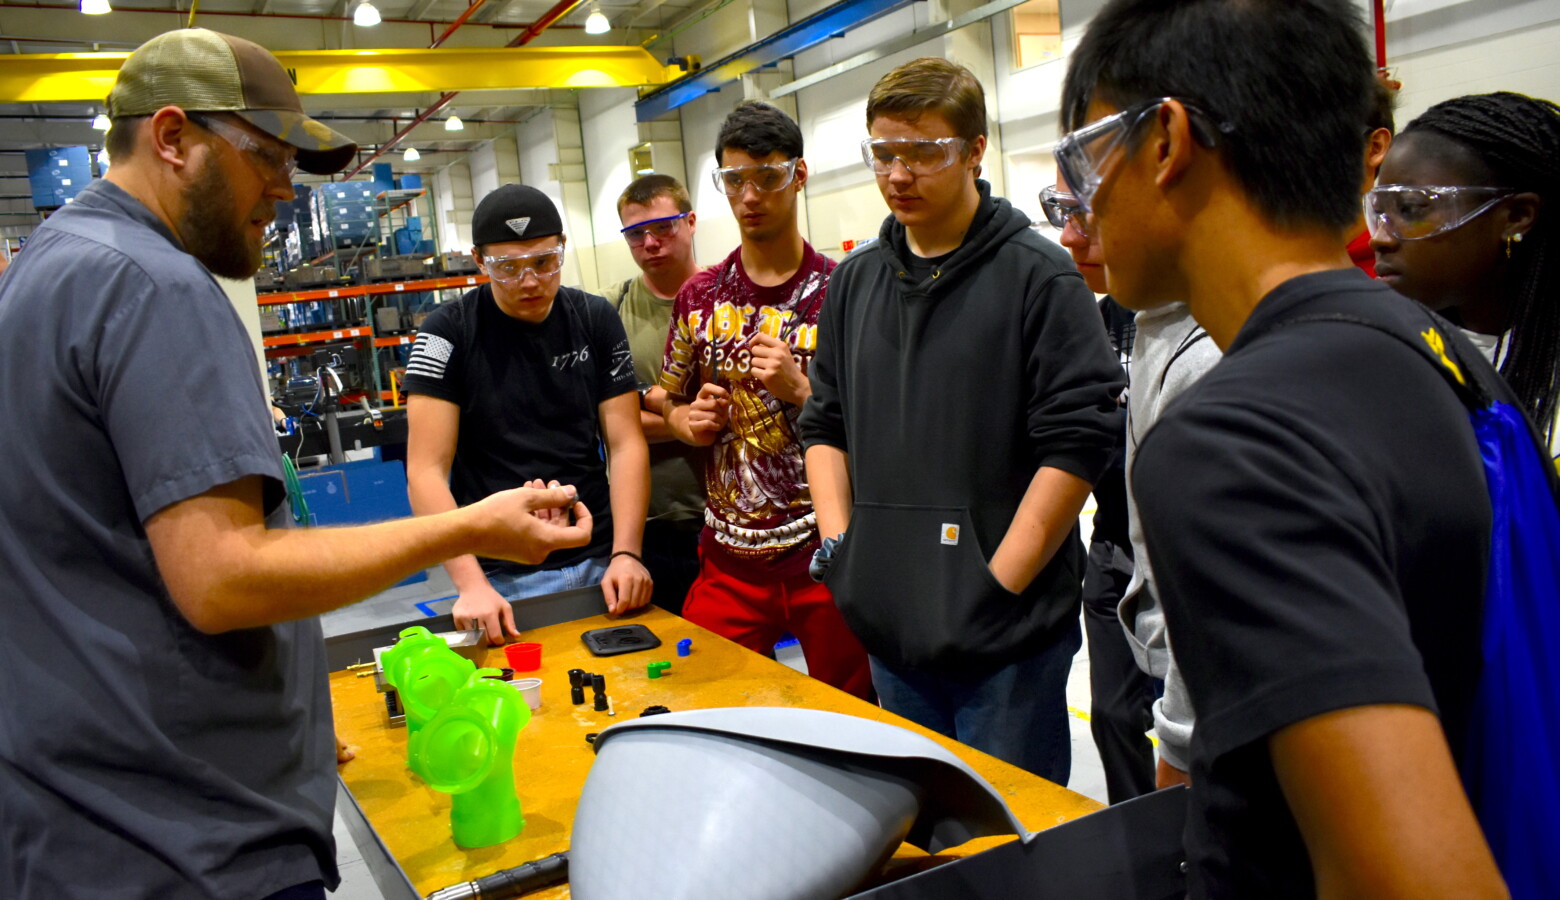 Jeremey Rorie shows Penn High School students what he does for work at B&B Molders in Mishawaka. (Justin Hicks/IPB News)